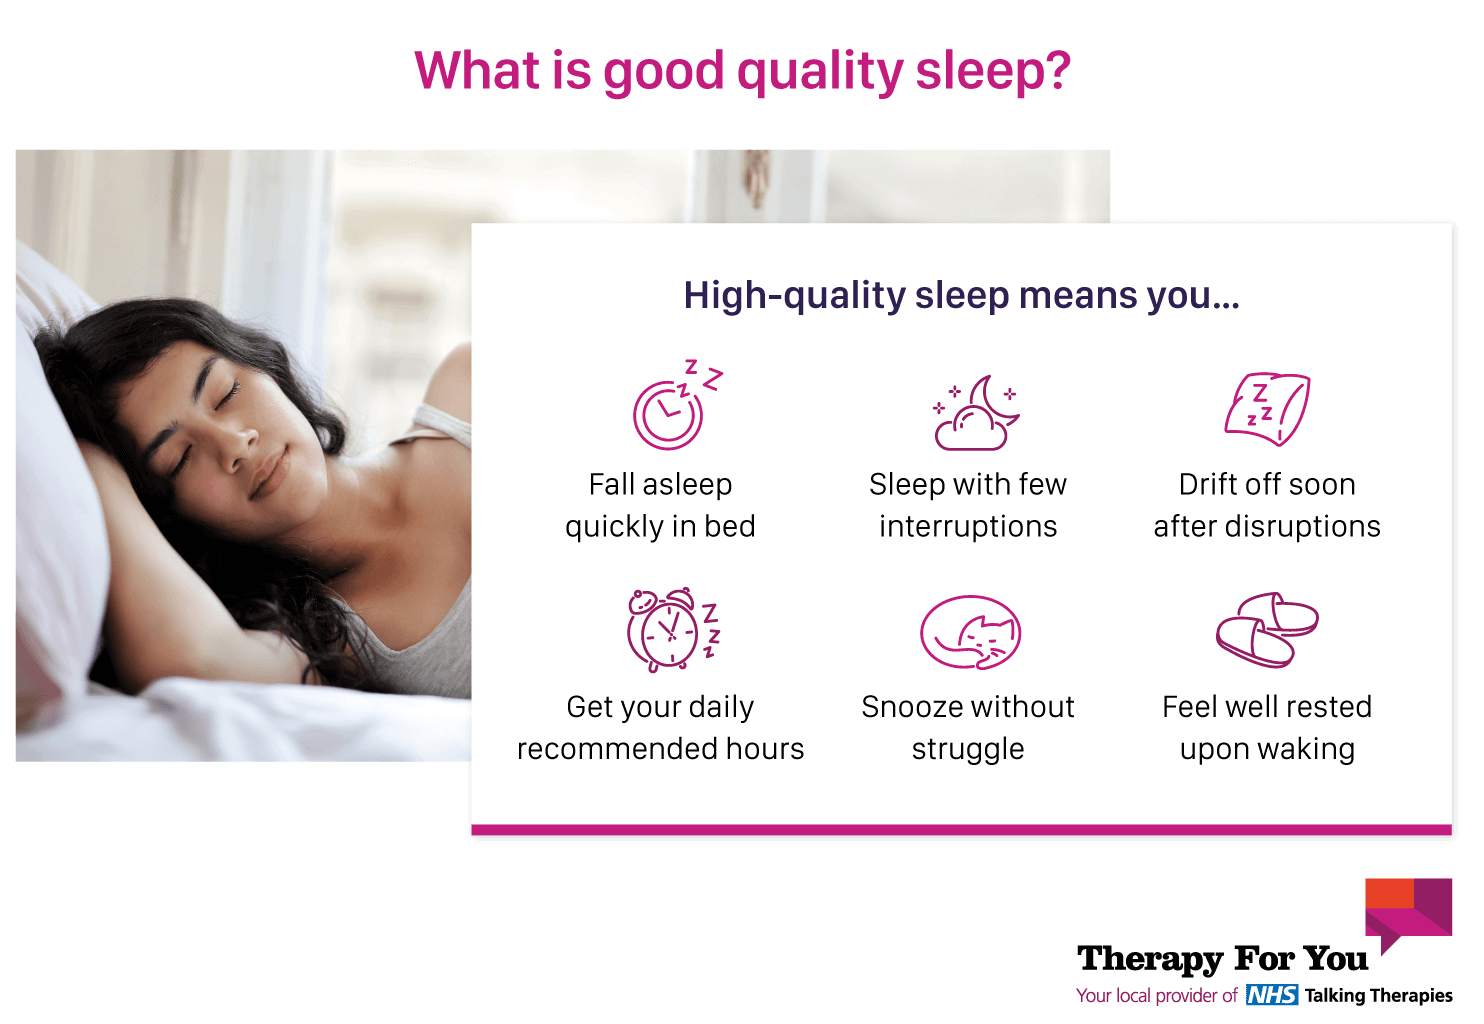 Infographic showing 6 factors that good quality sleep can be measured by